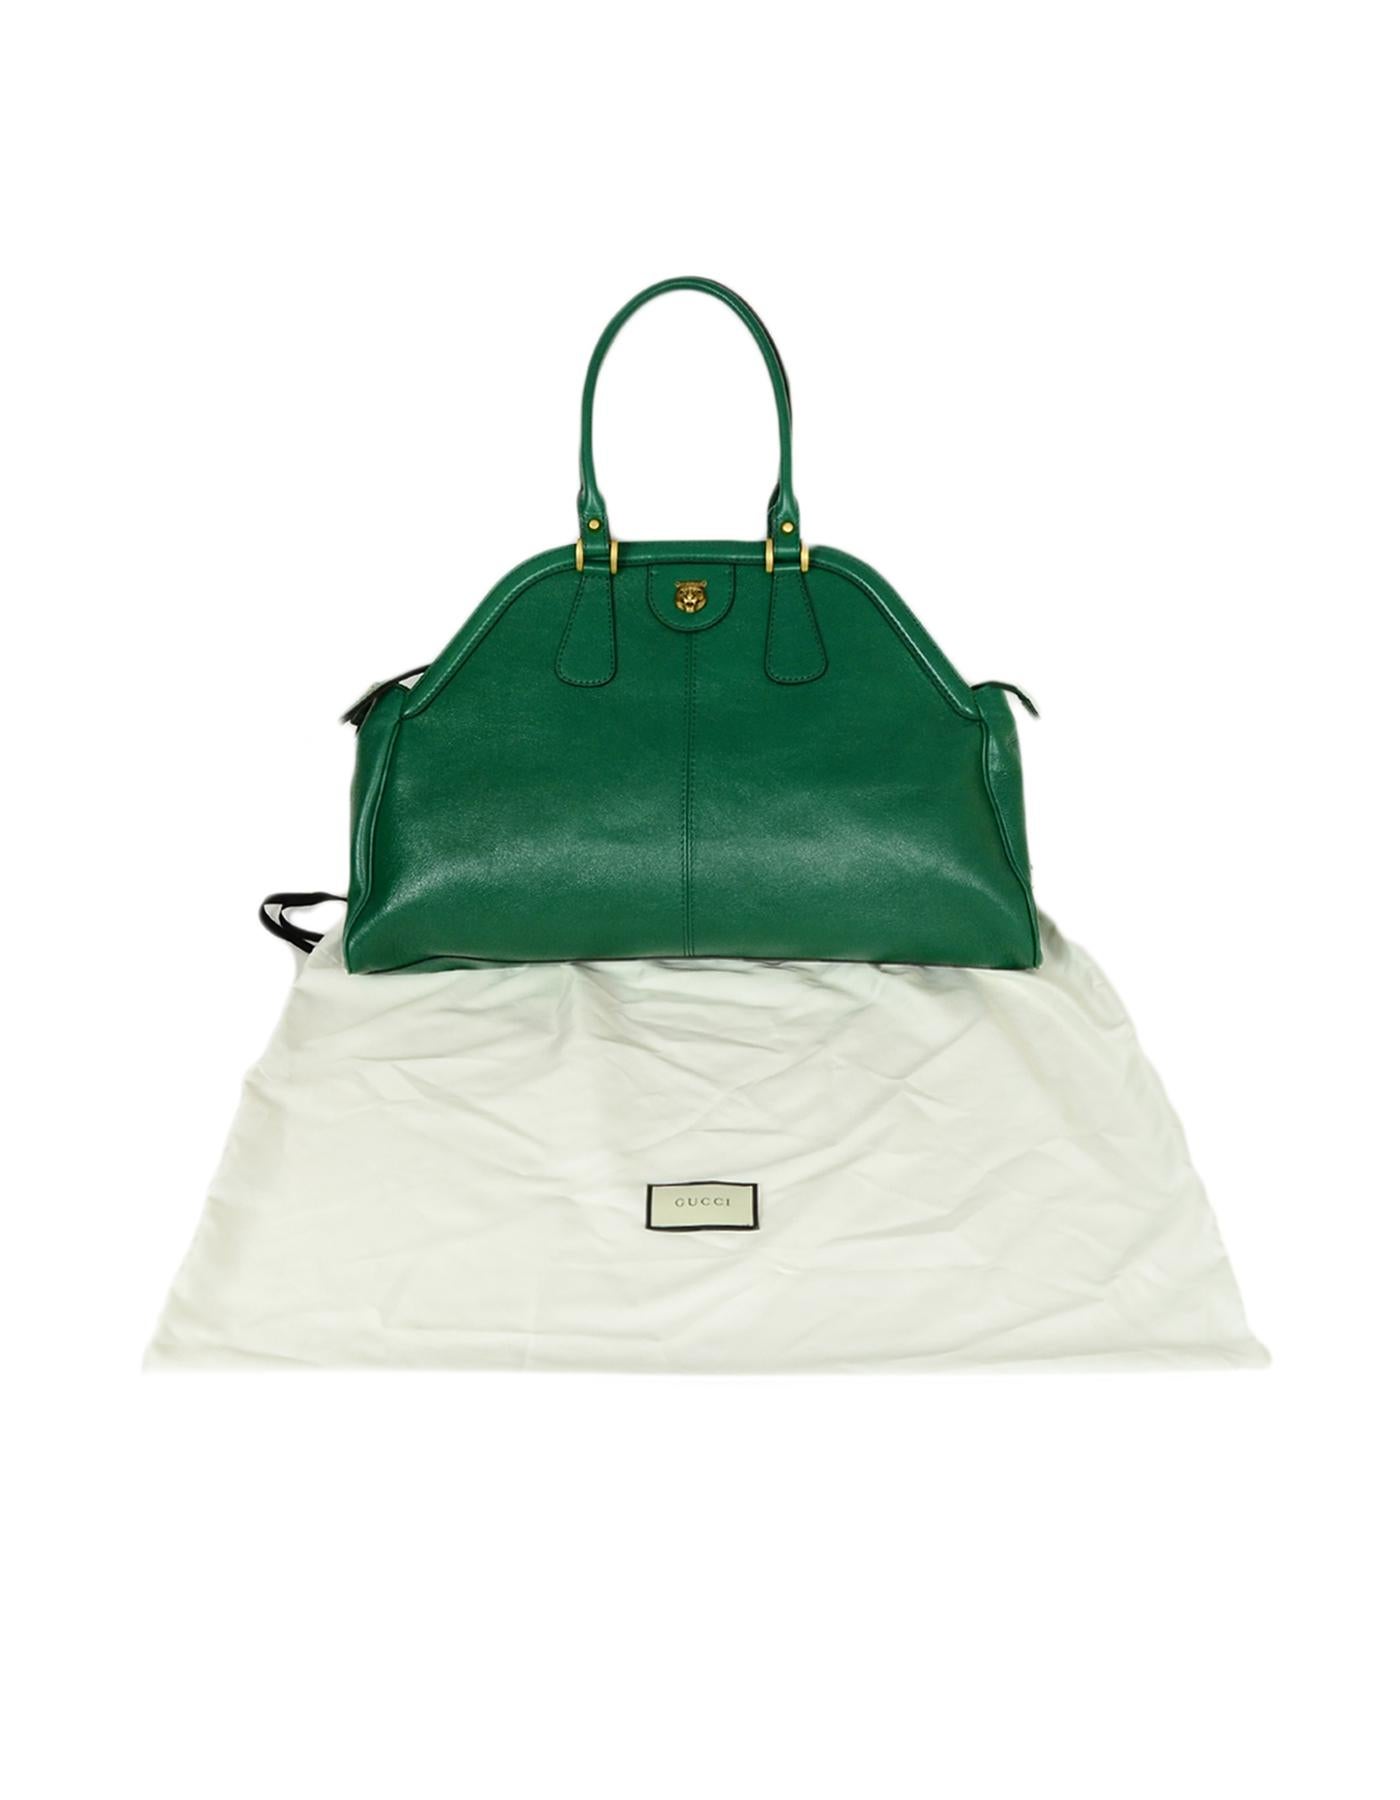 Gucci Green Leather Large (Re)Belle Tote Bag 2